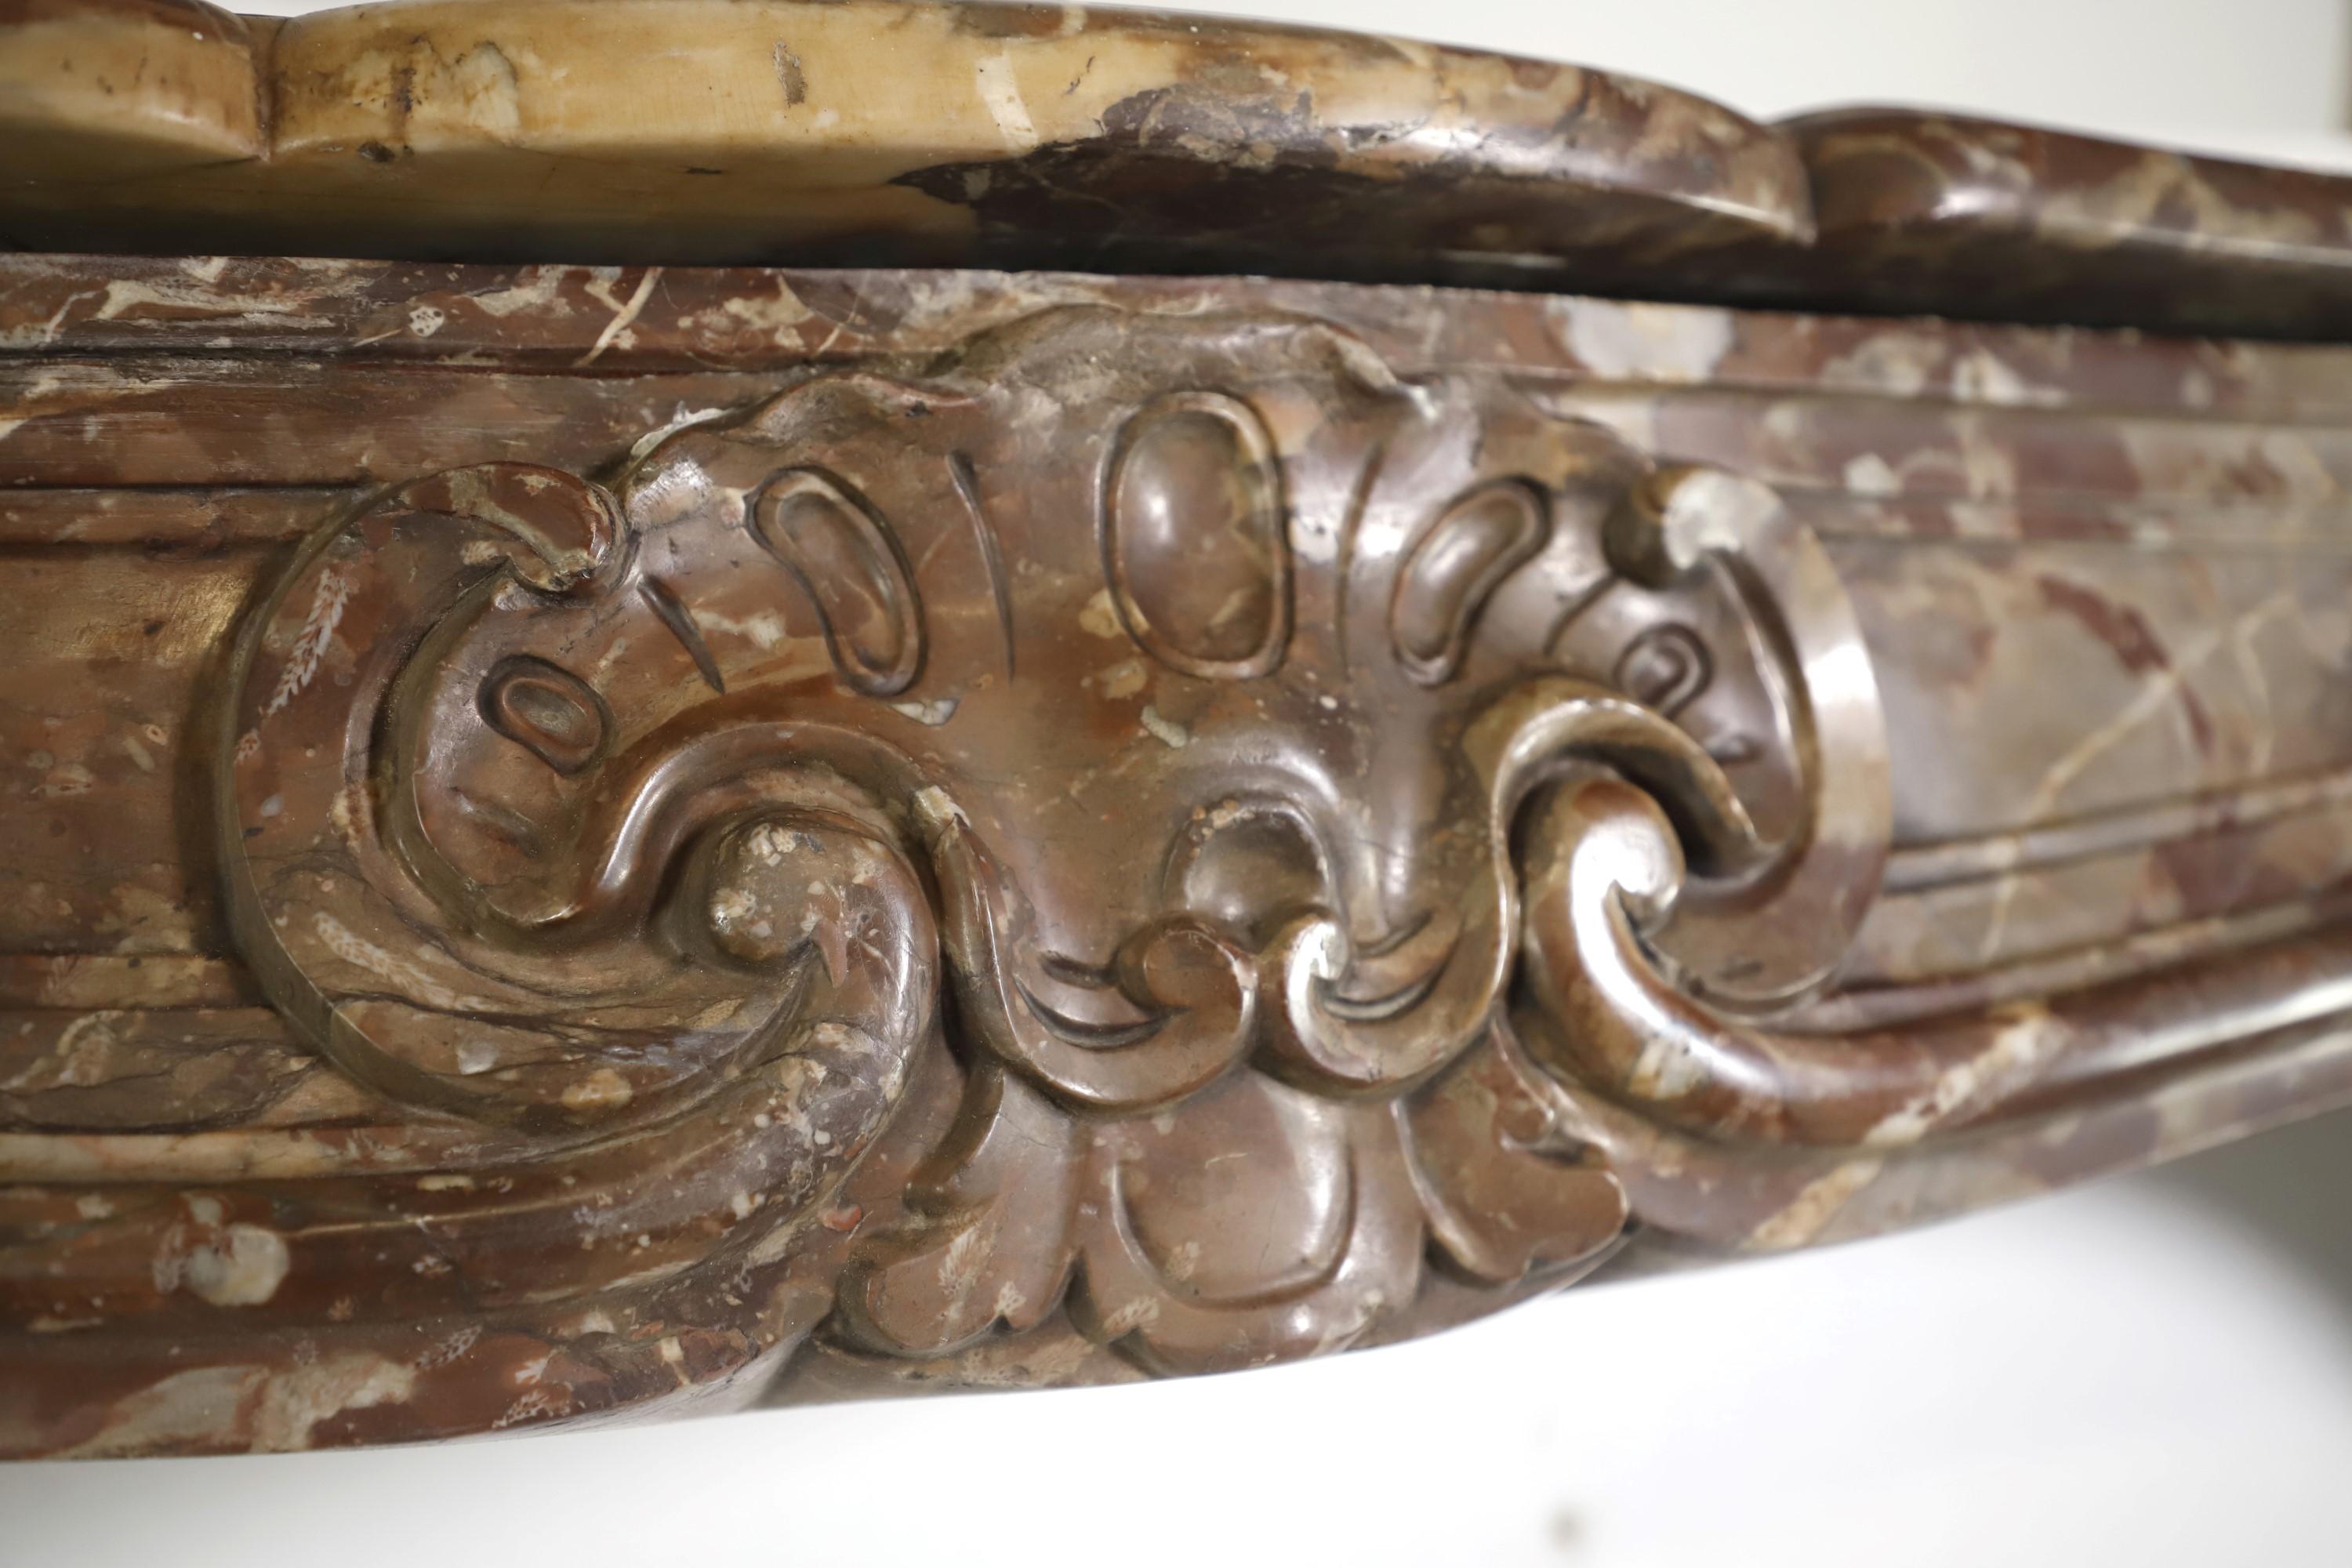 Retrieved from a 1926 residence at 950 5th Ave and East 76th St in Manhattan, NYC. This mantel was hand carved from brown rouge royal marble and features light grey and white accents. The serpentine front apron has an arched and scrolled center